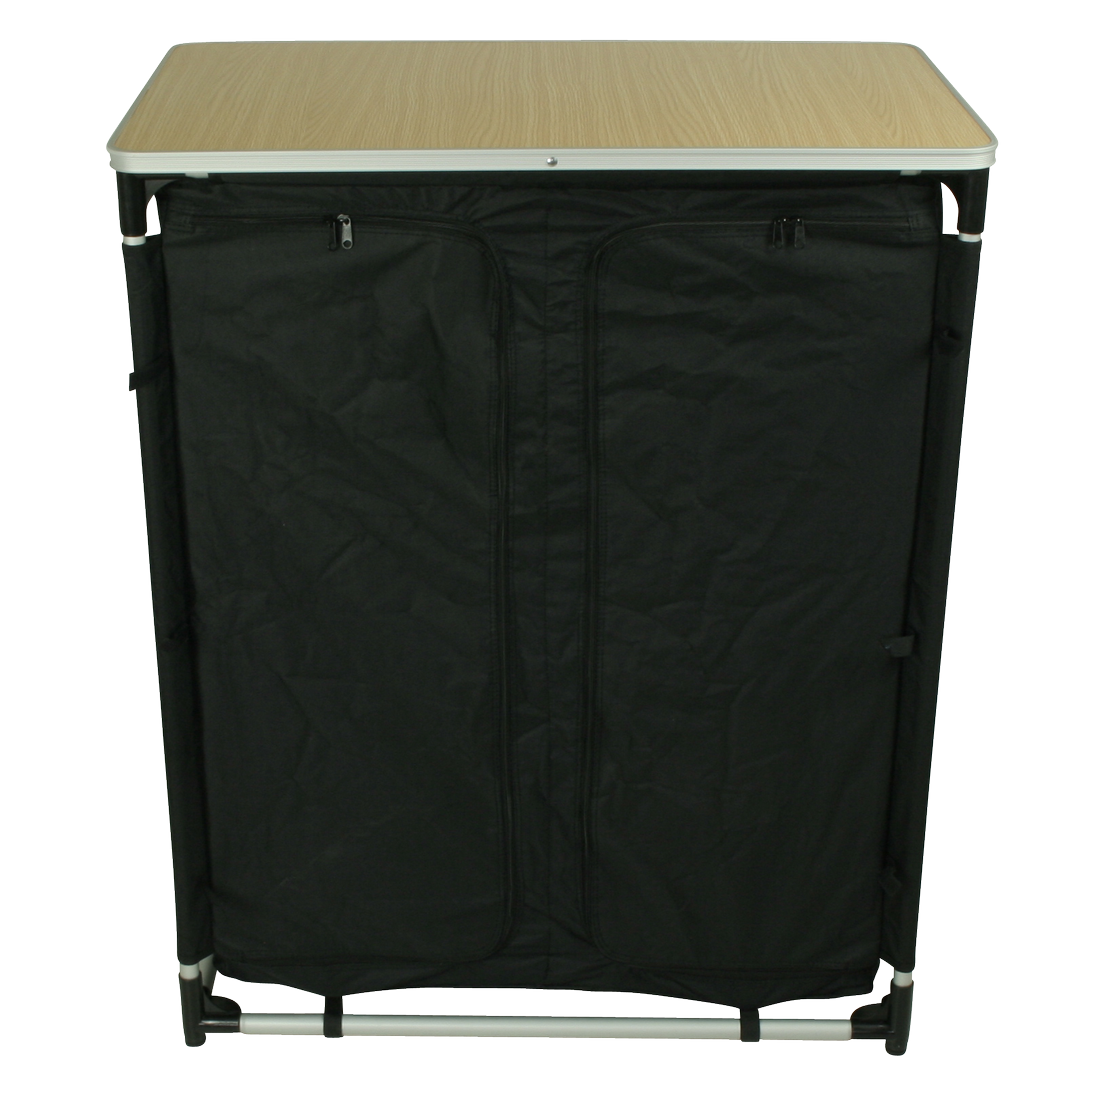 10T Cambox Multi - Camping cupboard, 6 compartments + top ...